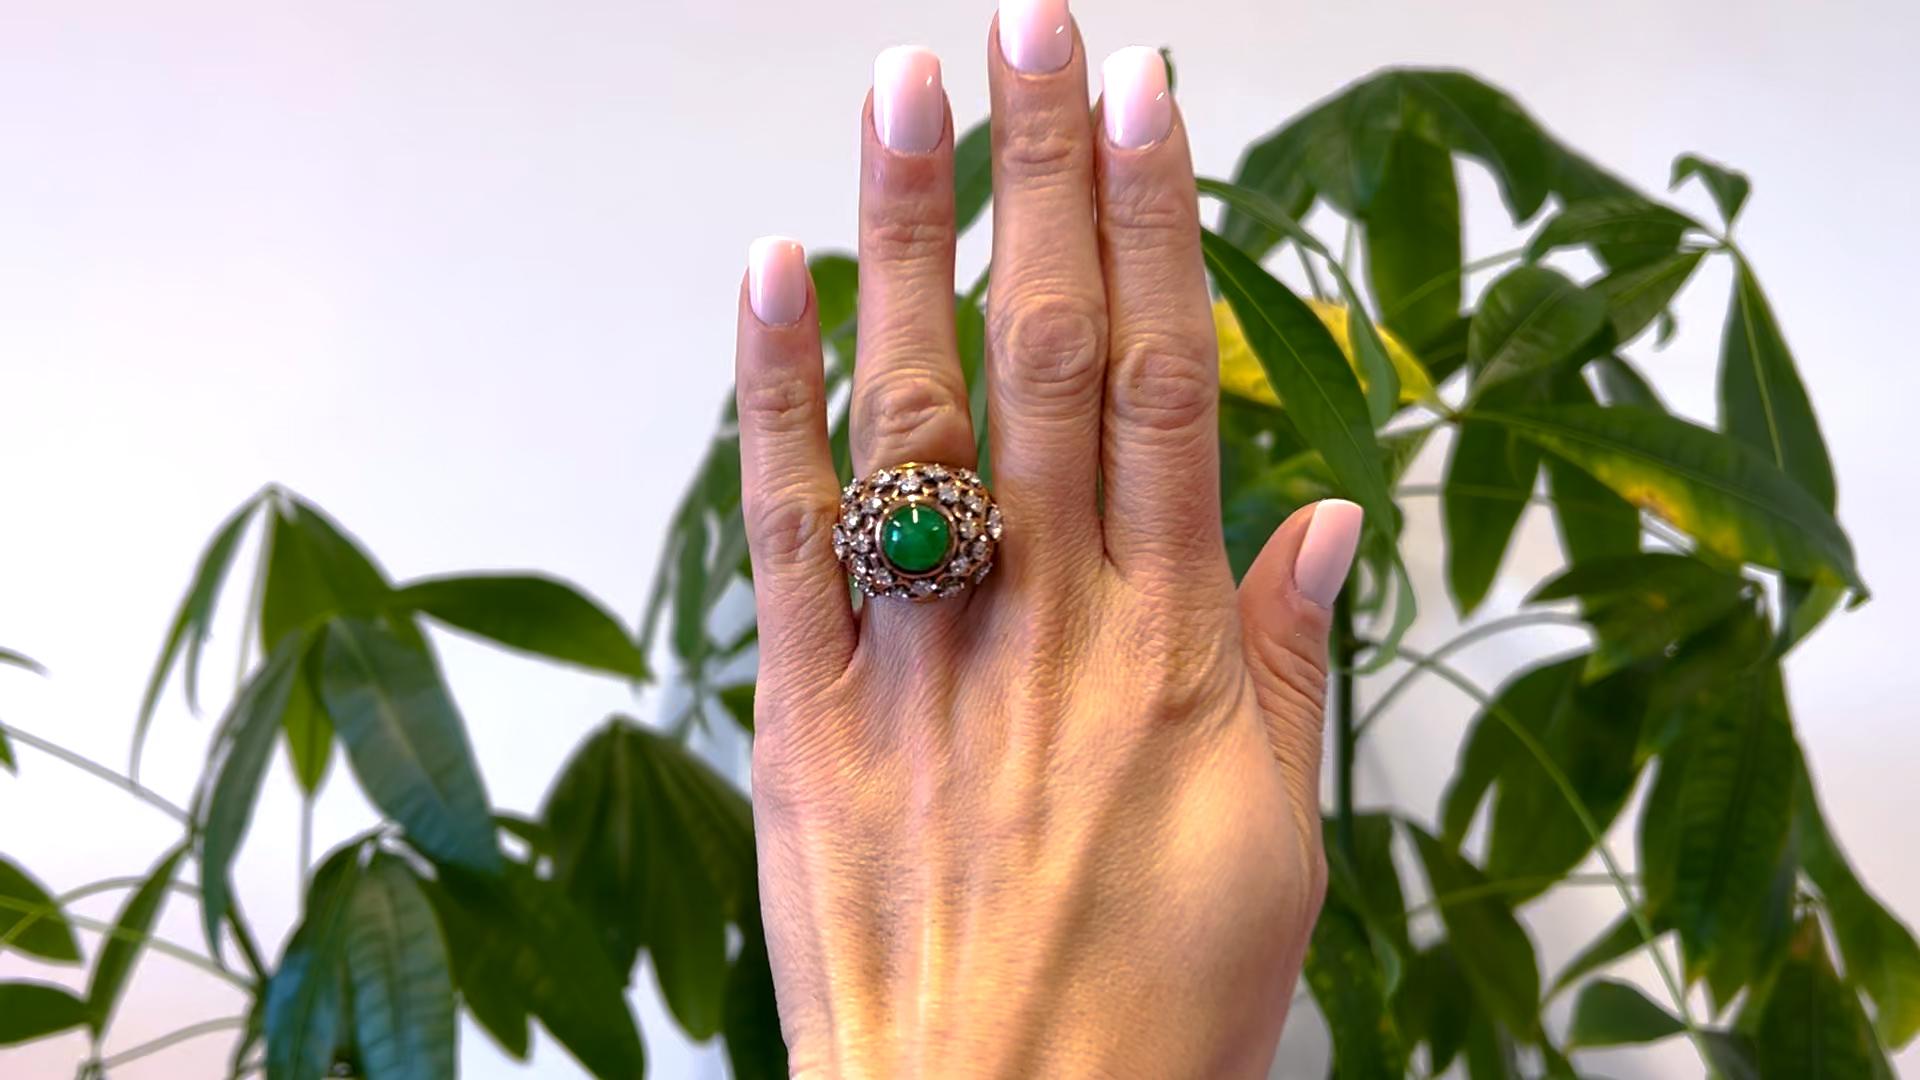 One Mid Century Boucheron Paris Jadeite and Diamond 18k Gold Bombé Ring. Featuring one cabochon cut jadeite weighing approximately 4.65 carats. Accented by 22 old European cut diamonds with a total weight of approximately 3.60, graded colorless,